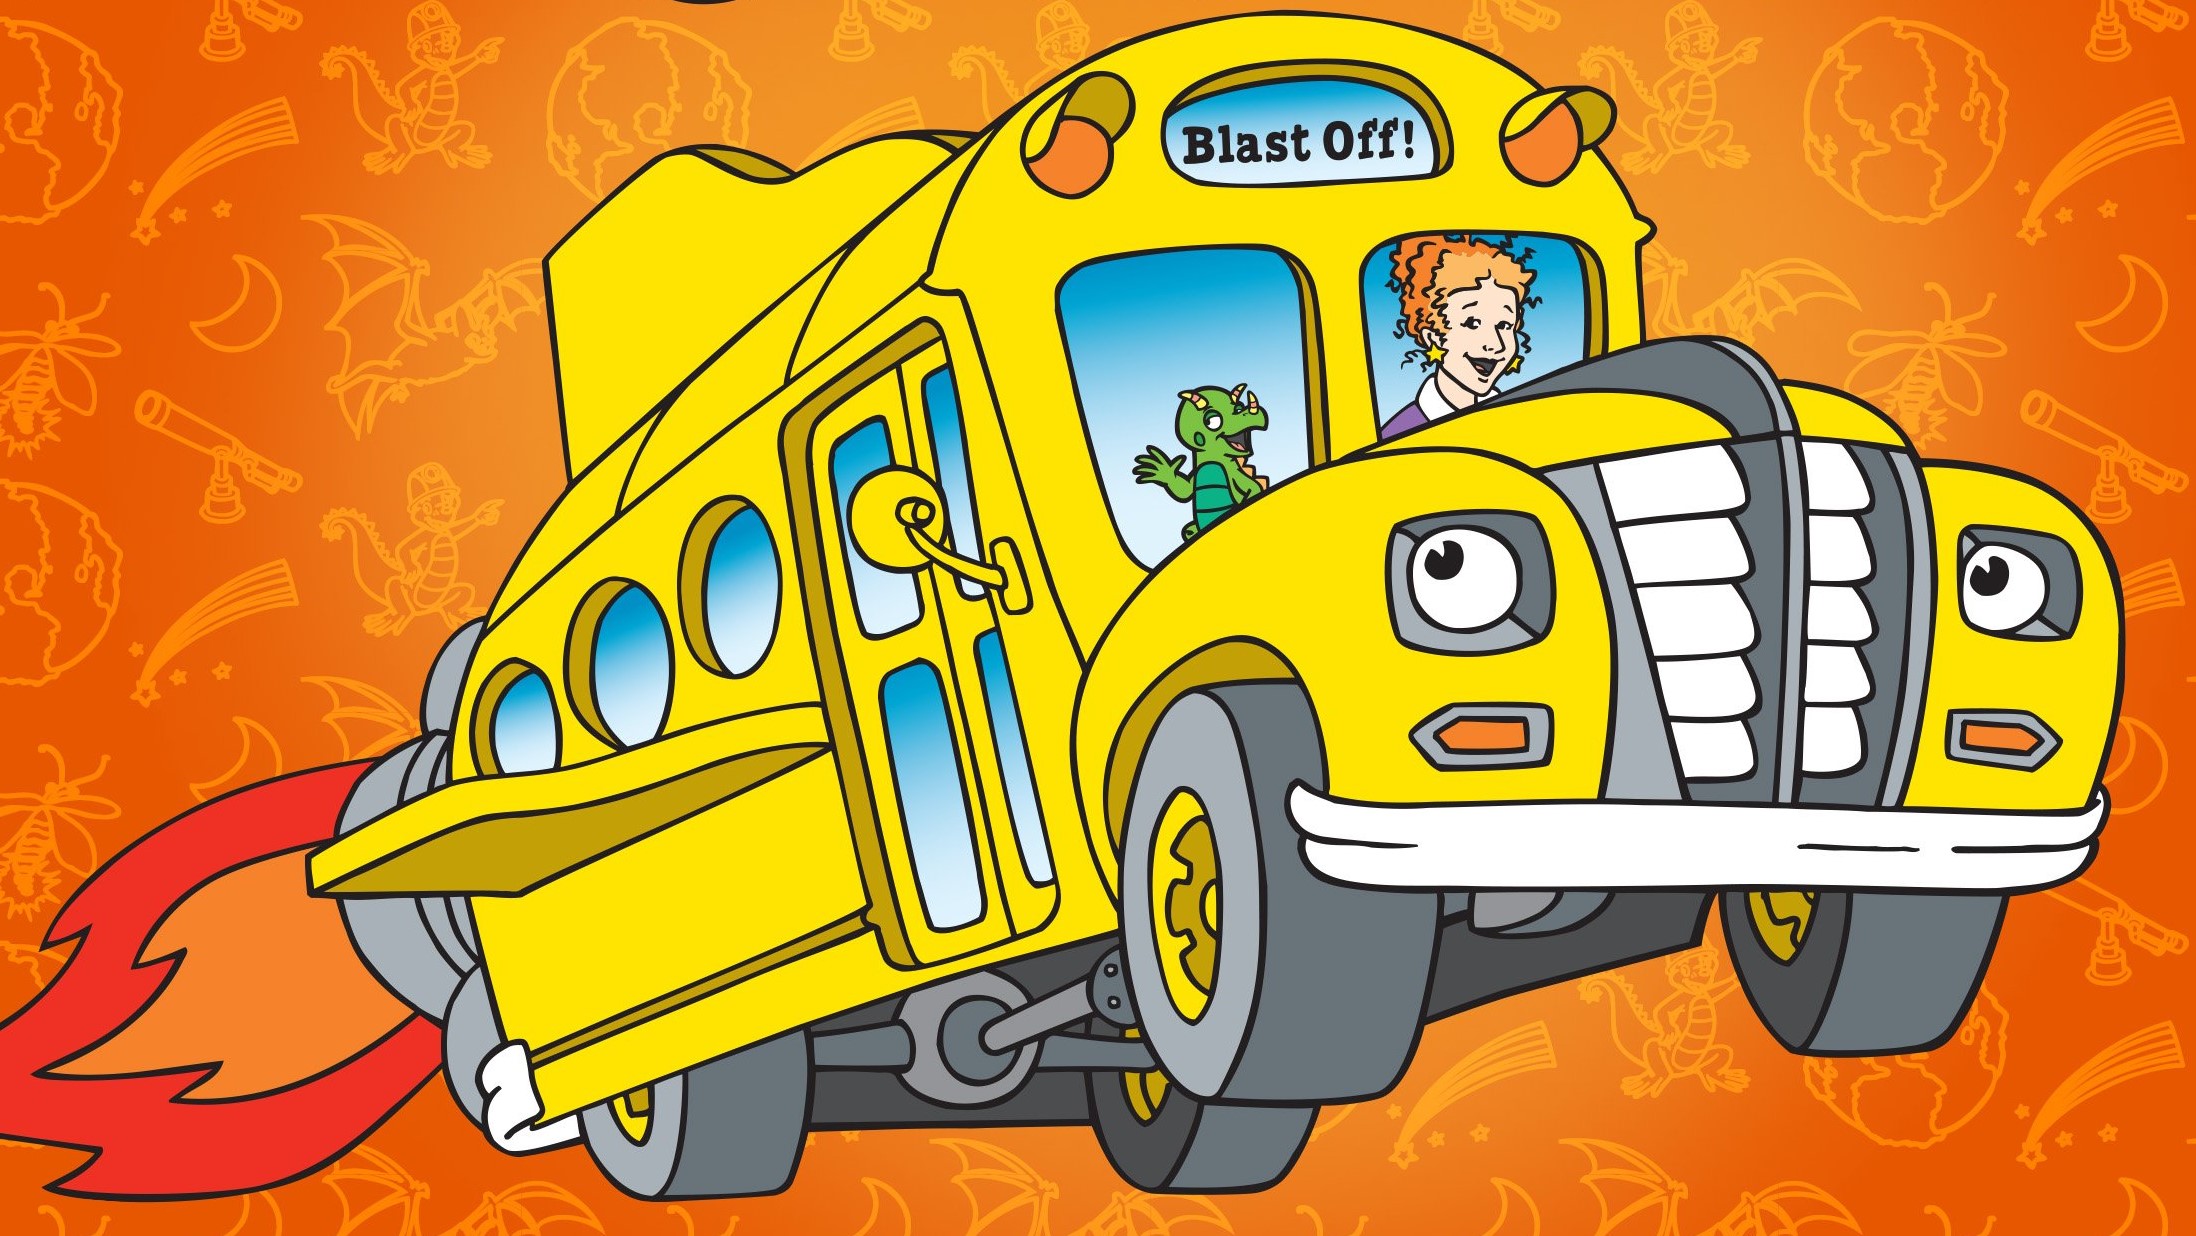 The bus from the Magic School Bus